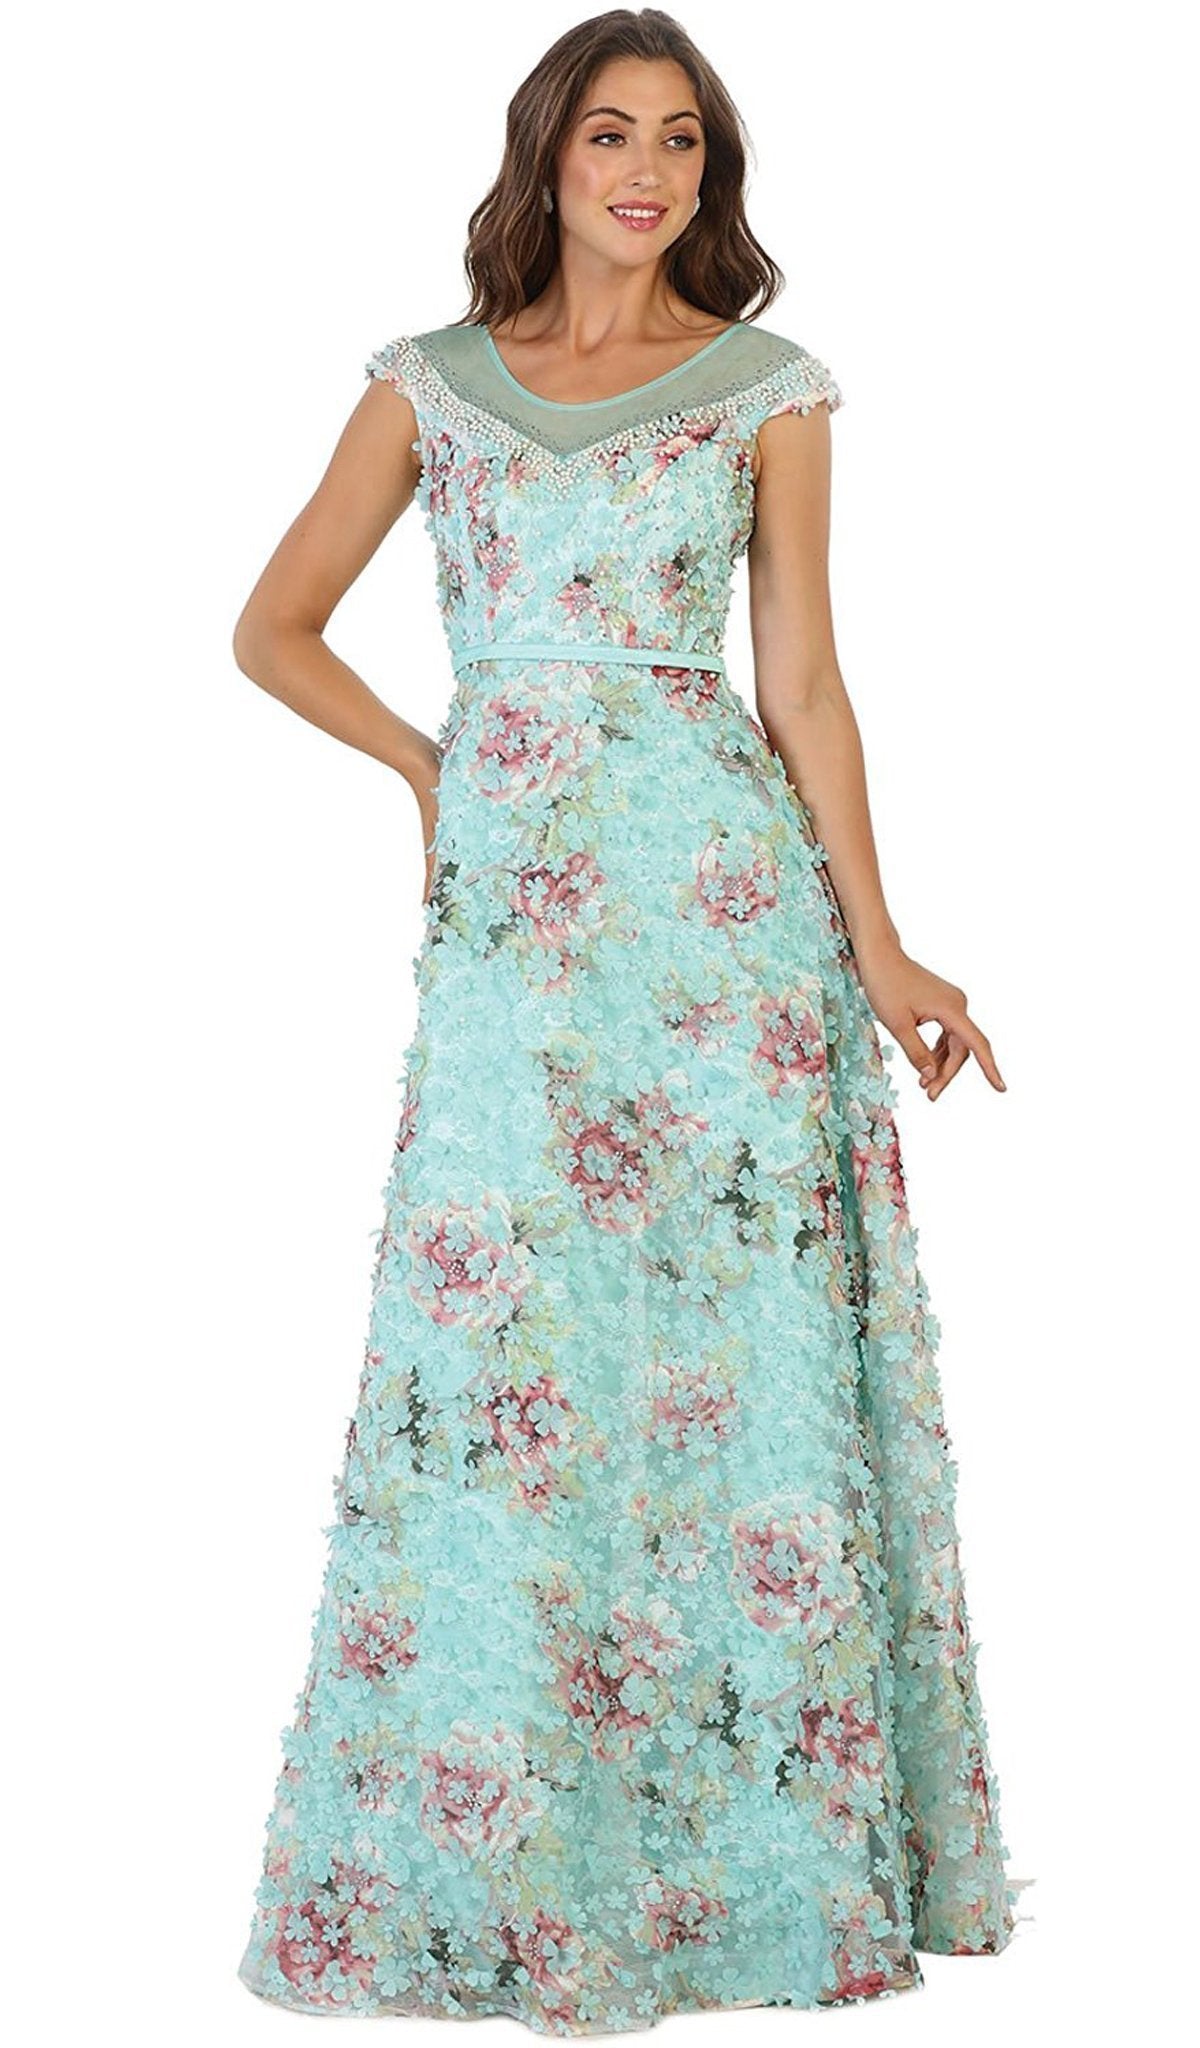 May Queen - RQ7554 Cap Sleeve Floral Embellished A-line Evening Gown In Blue